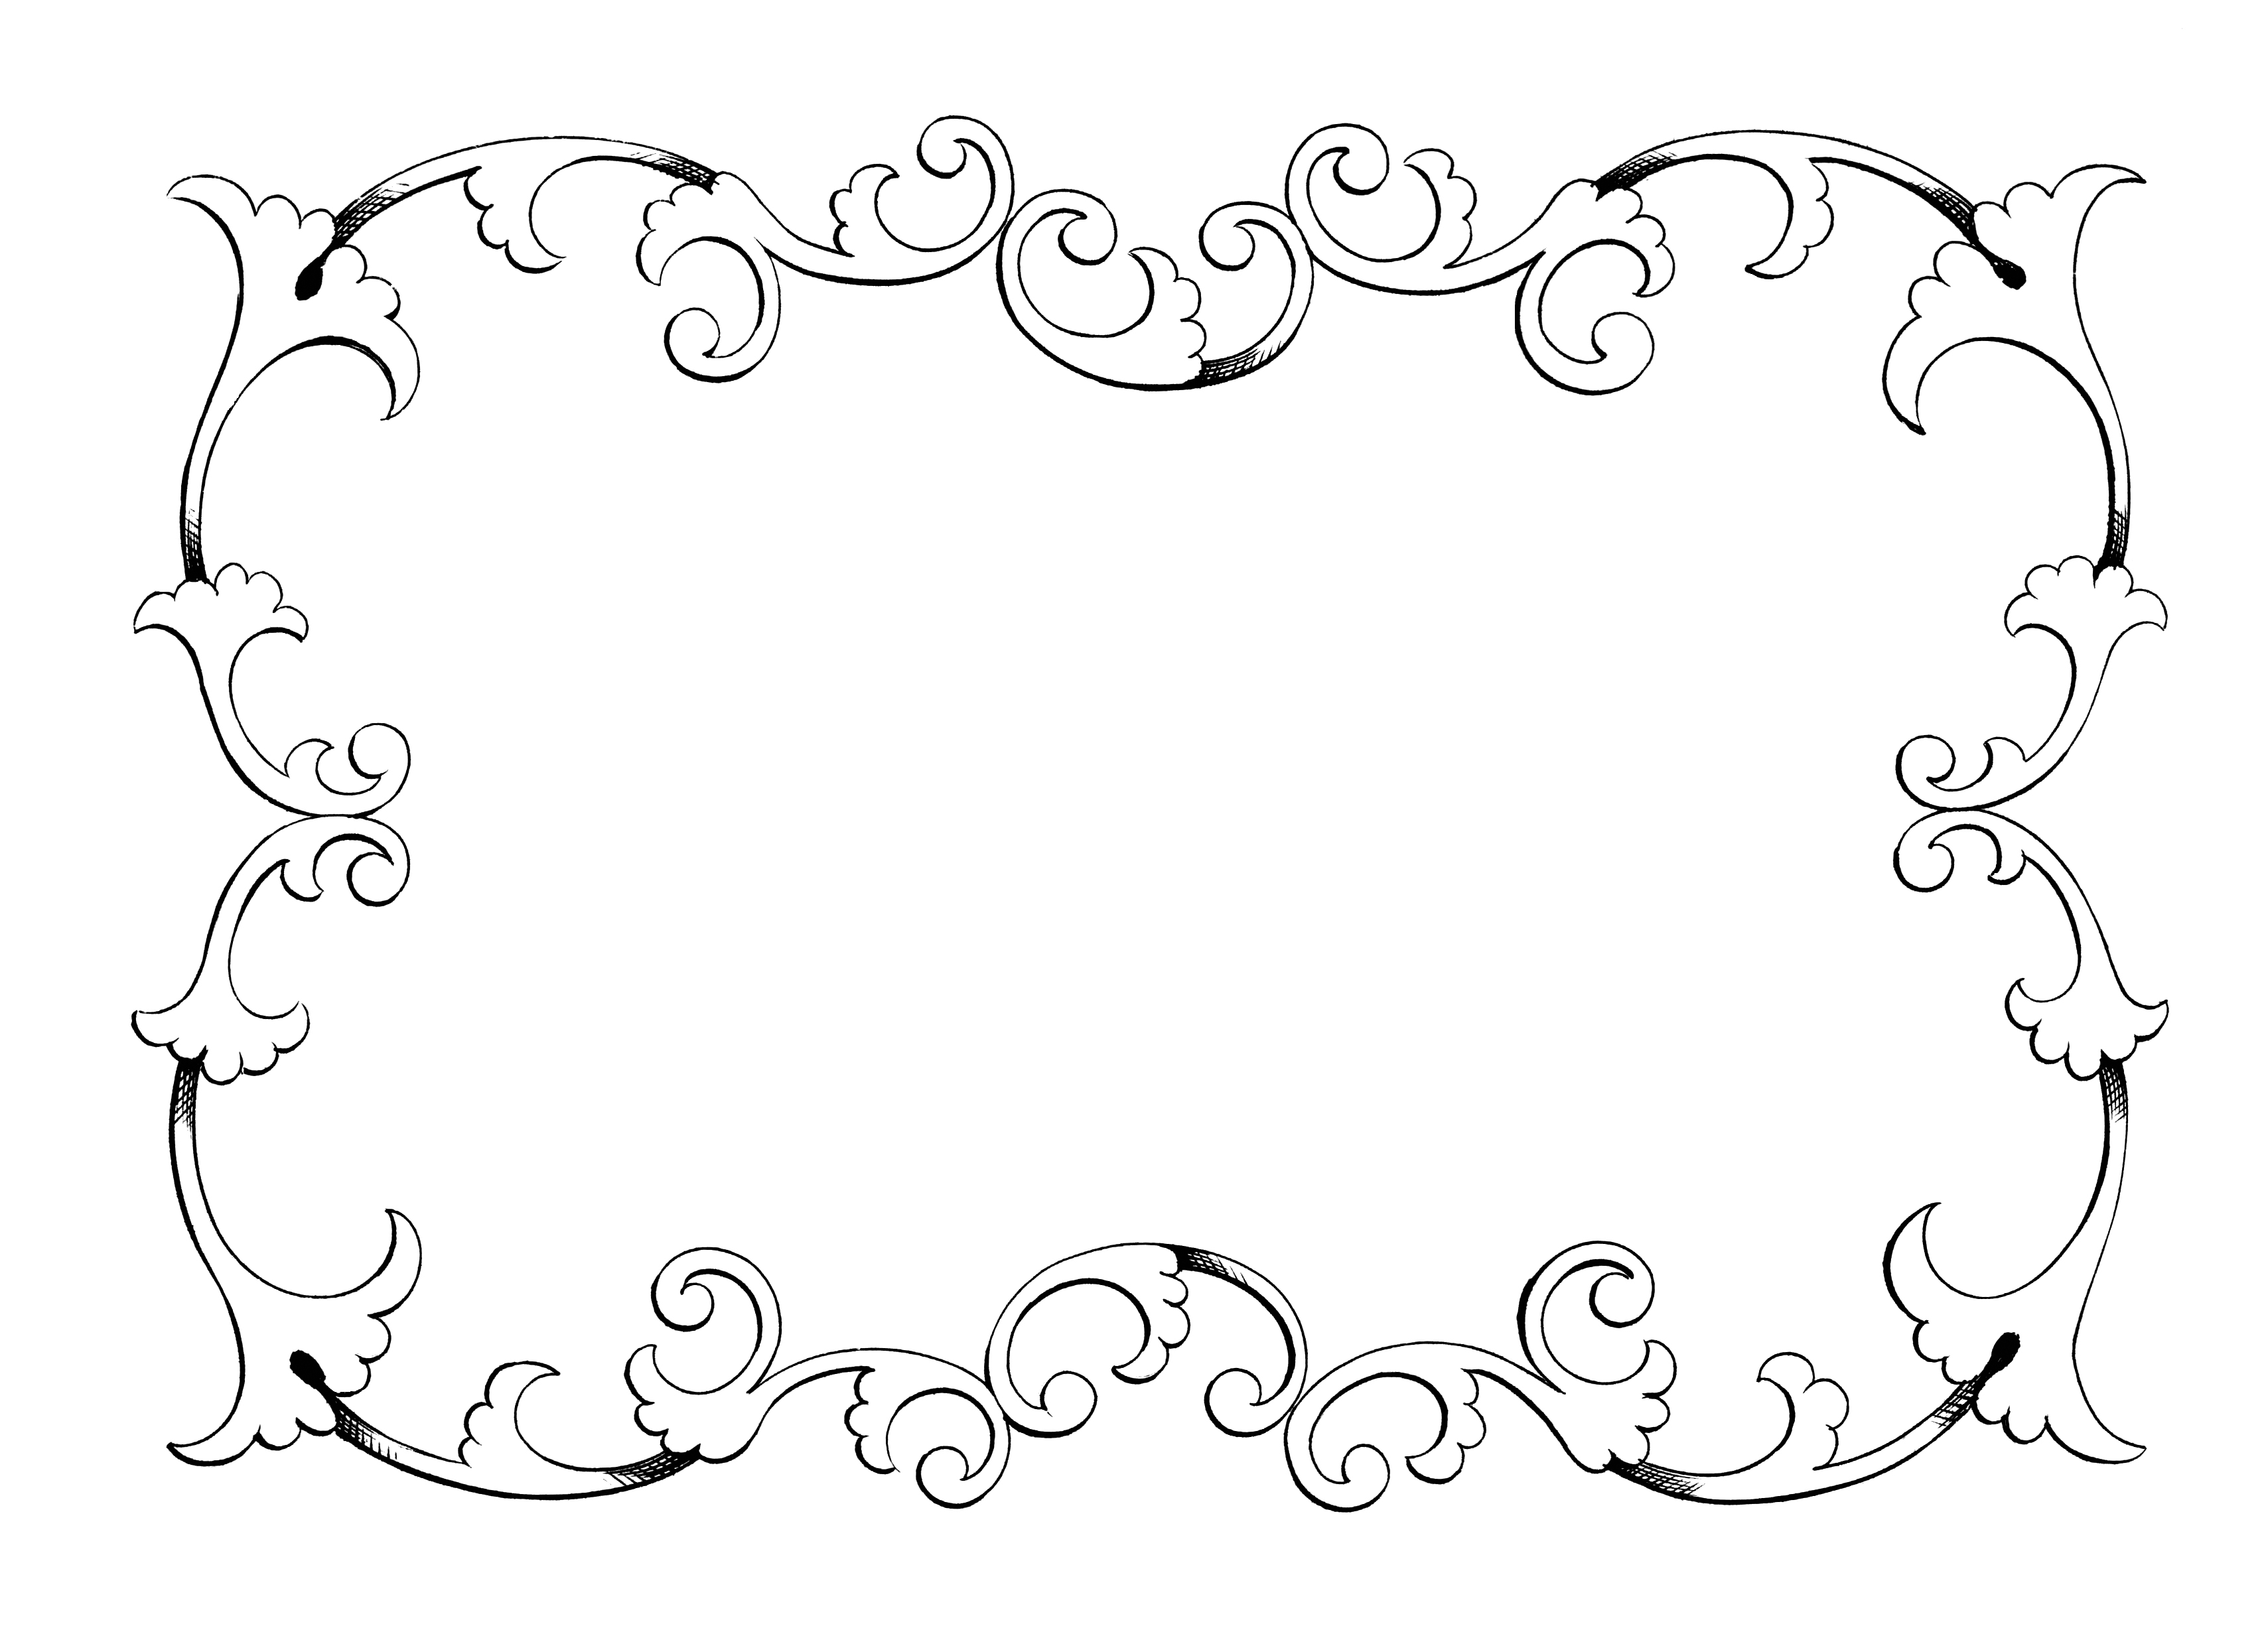 Clip Art Frame Border Freebie | Oh So Nifty Vintage Graphics